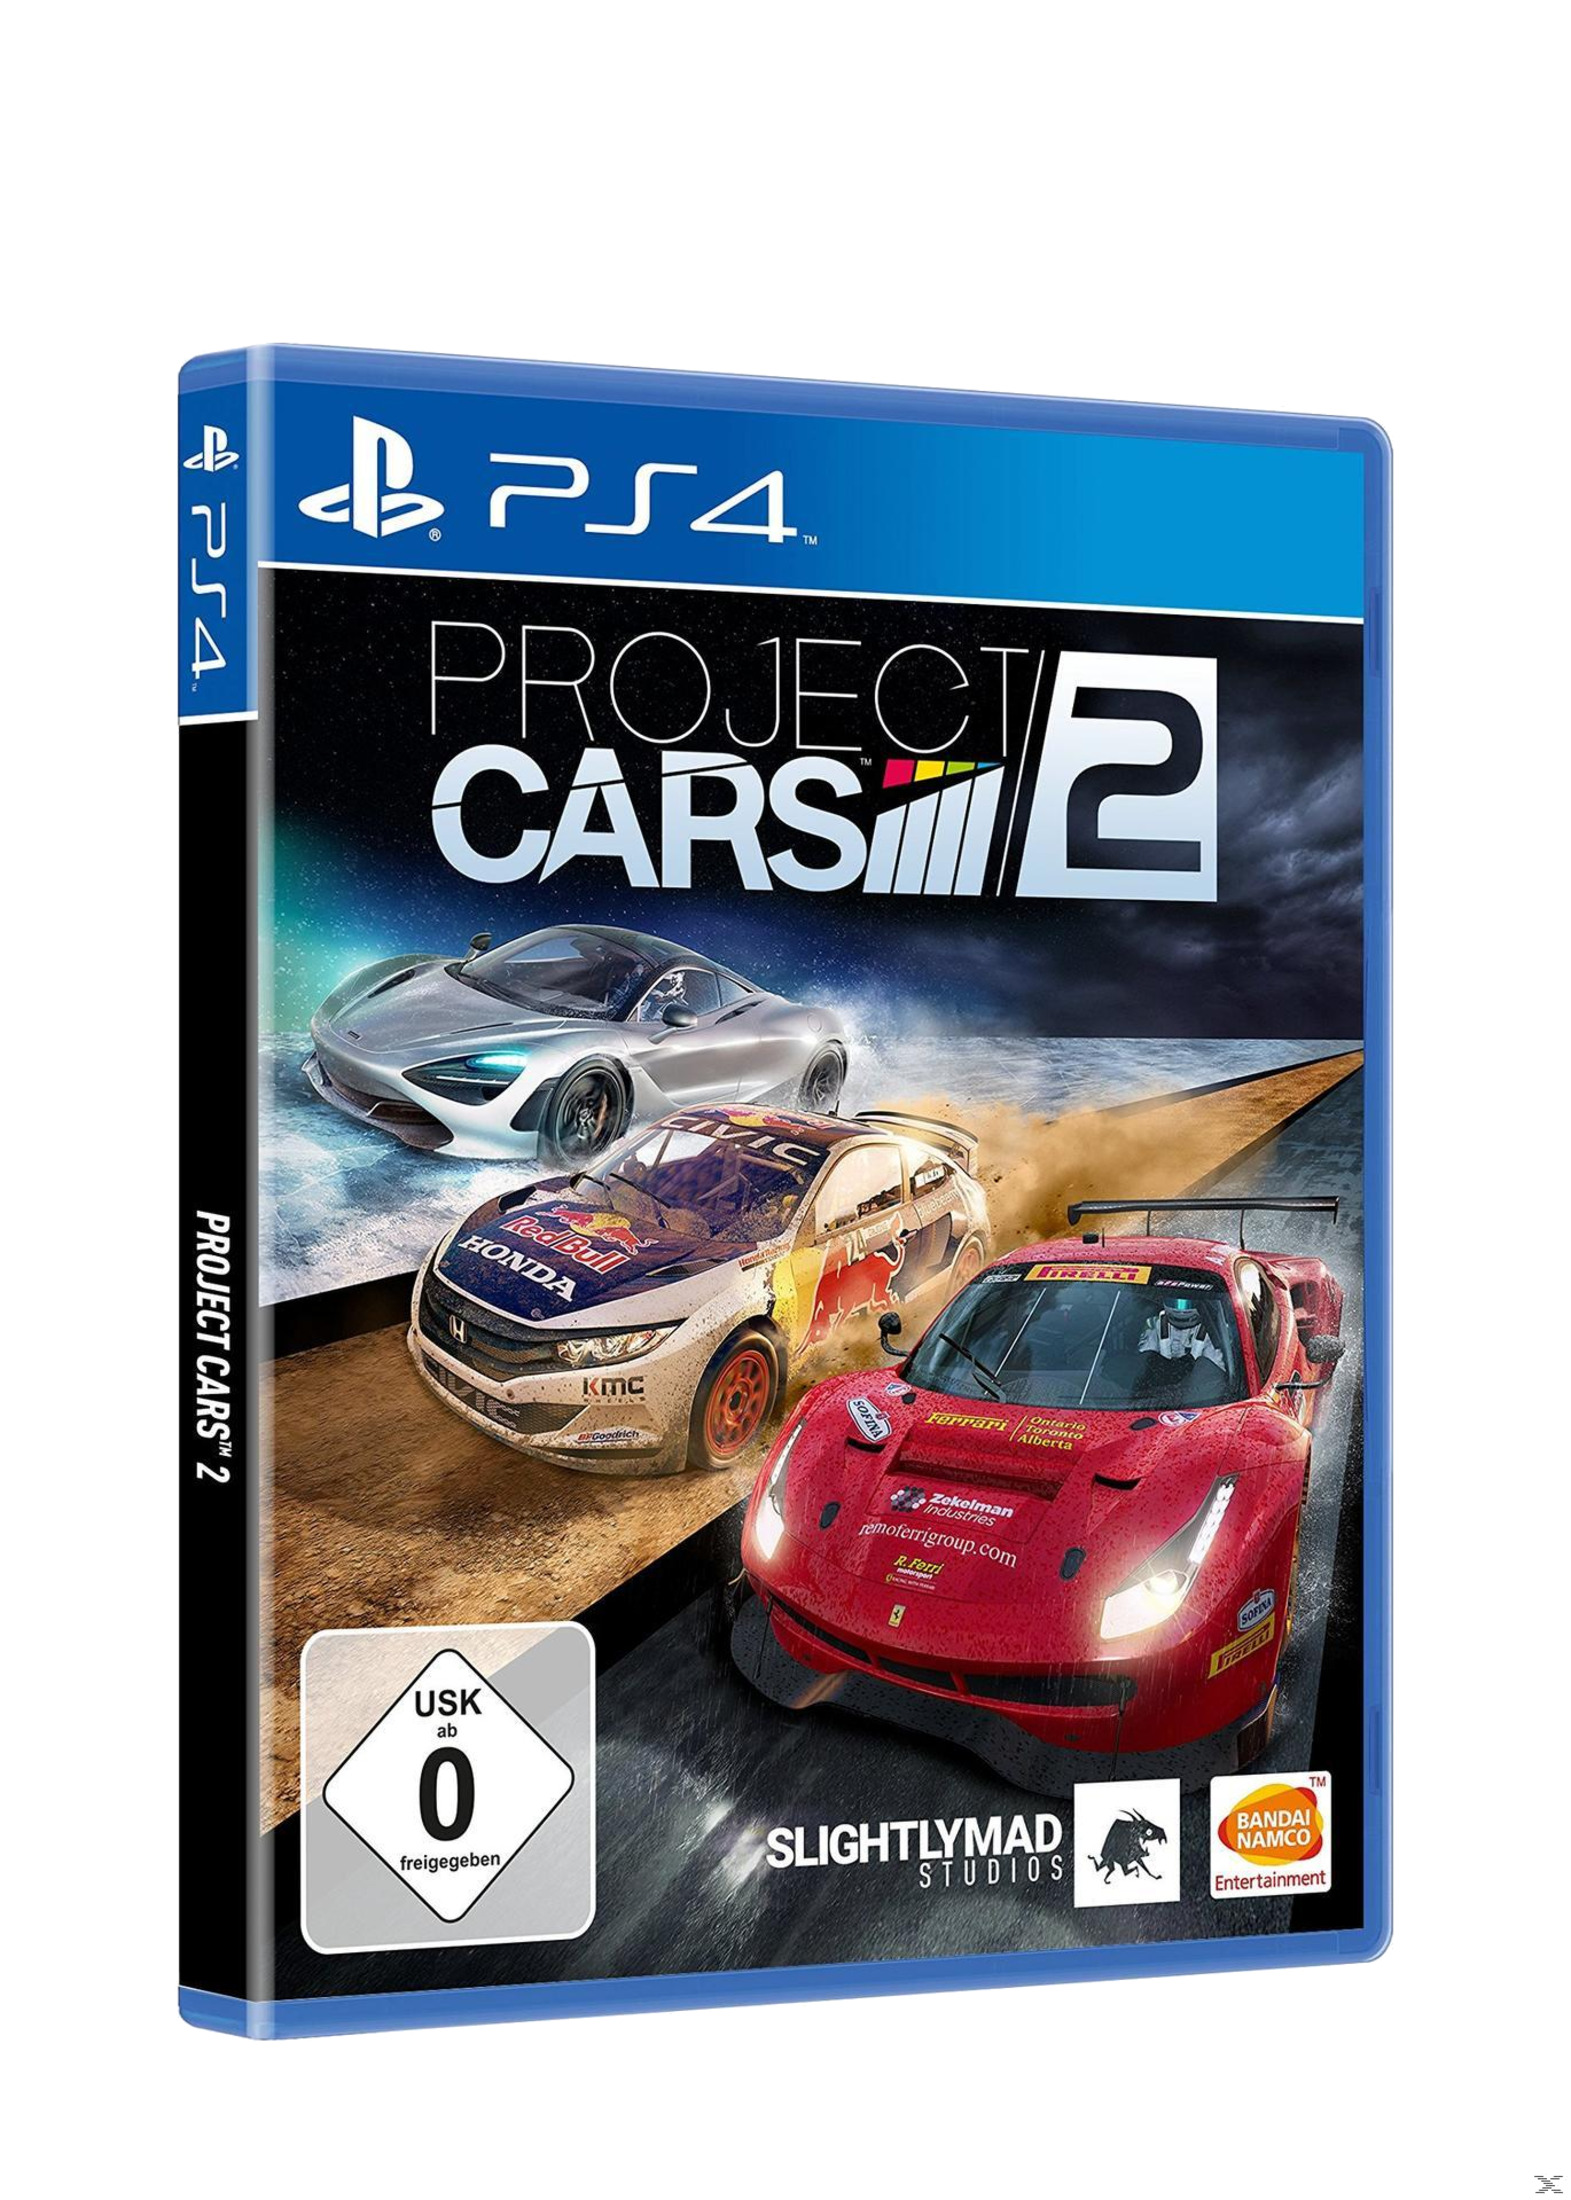 Cars [PlayStation - 2 4] Project